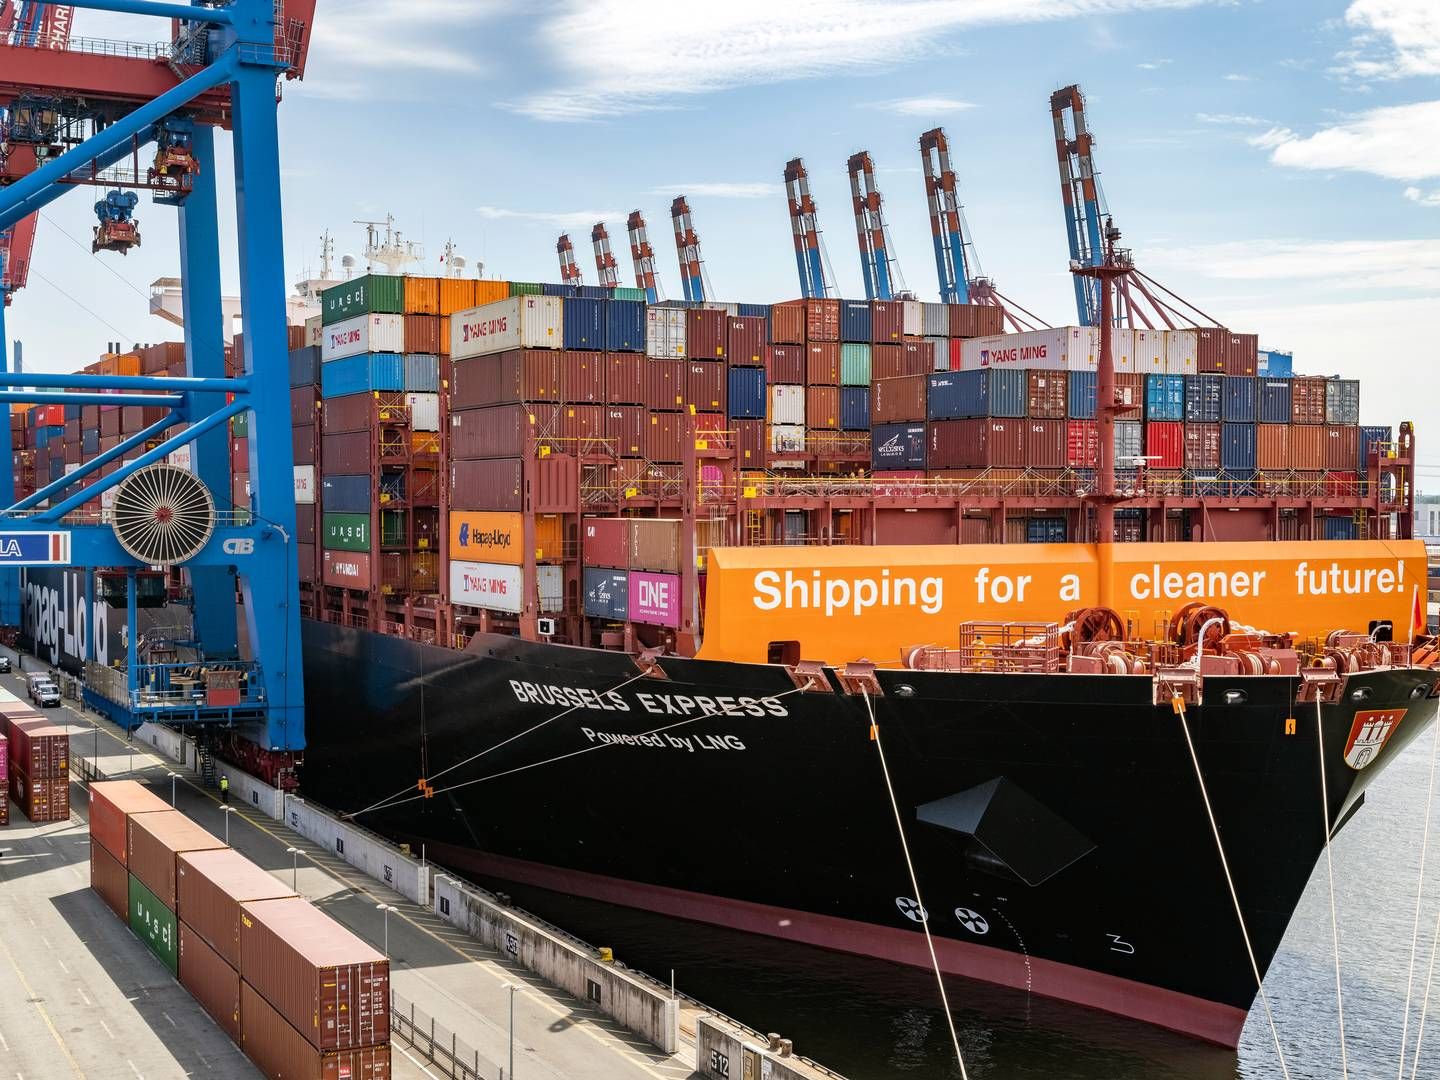 According to Lars Jensen, CEO of Vespucci Maritime, the savings on the EU's upcoming climate tax by changing routes is around 18%. | Photo: Hapag-lloyd